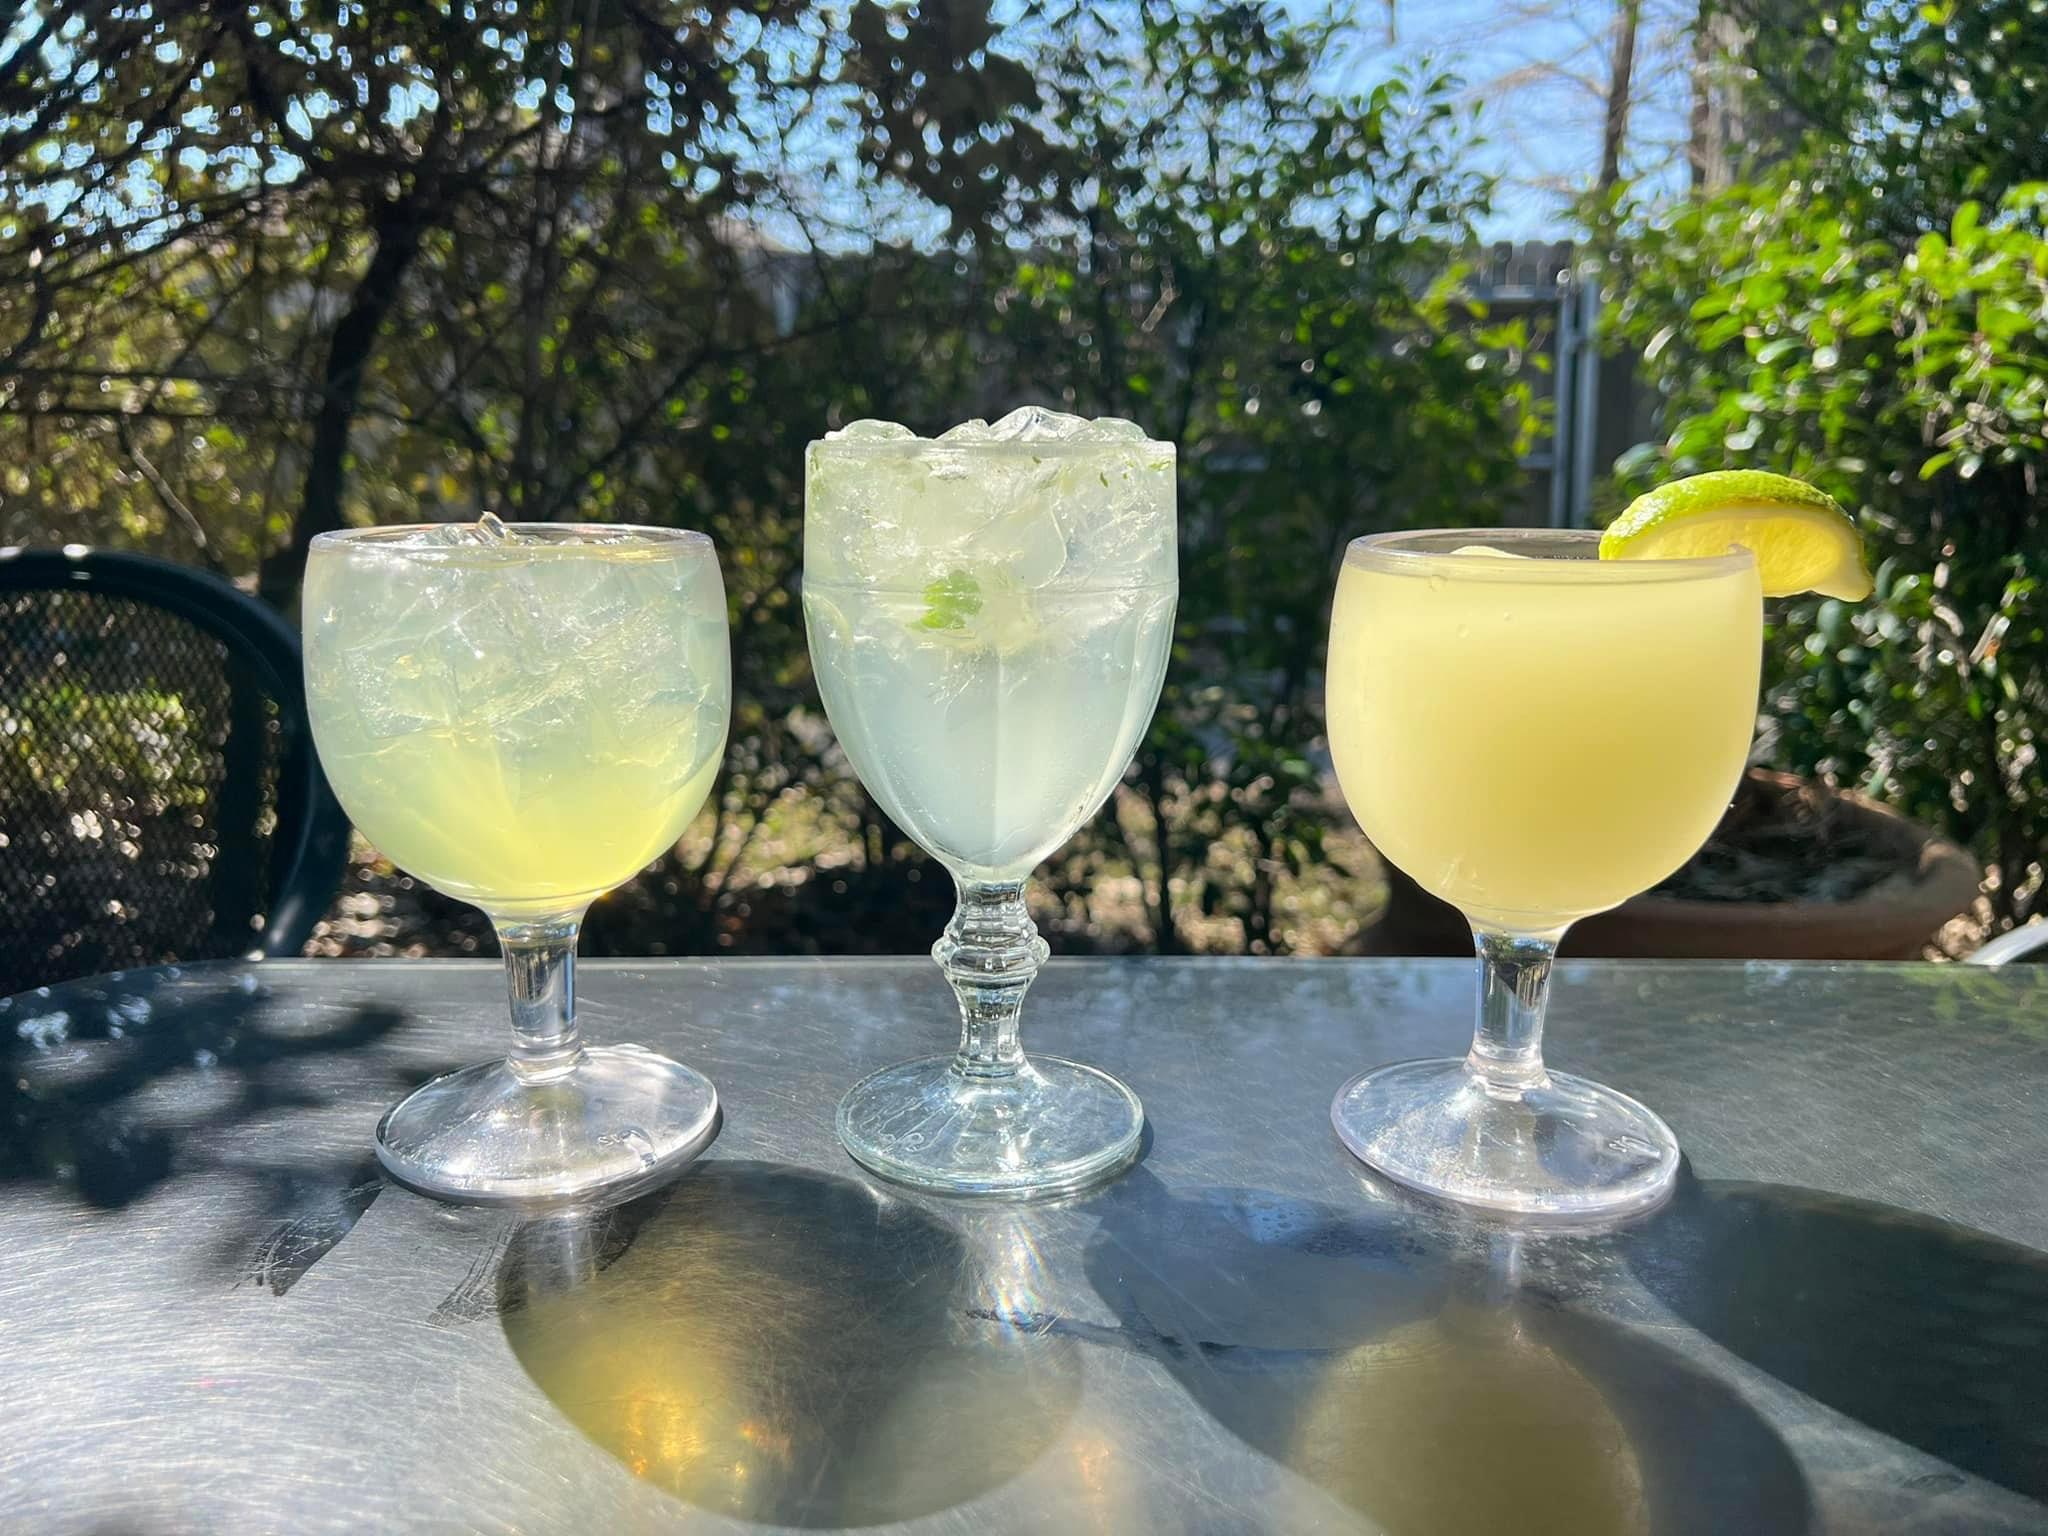 who has the best margaritas in New Orleans